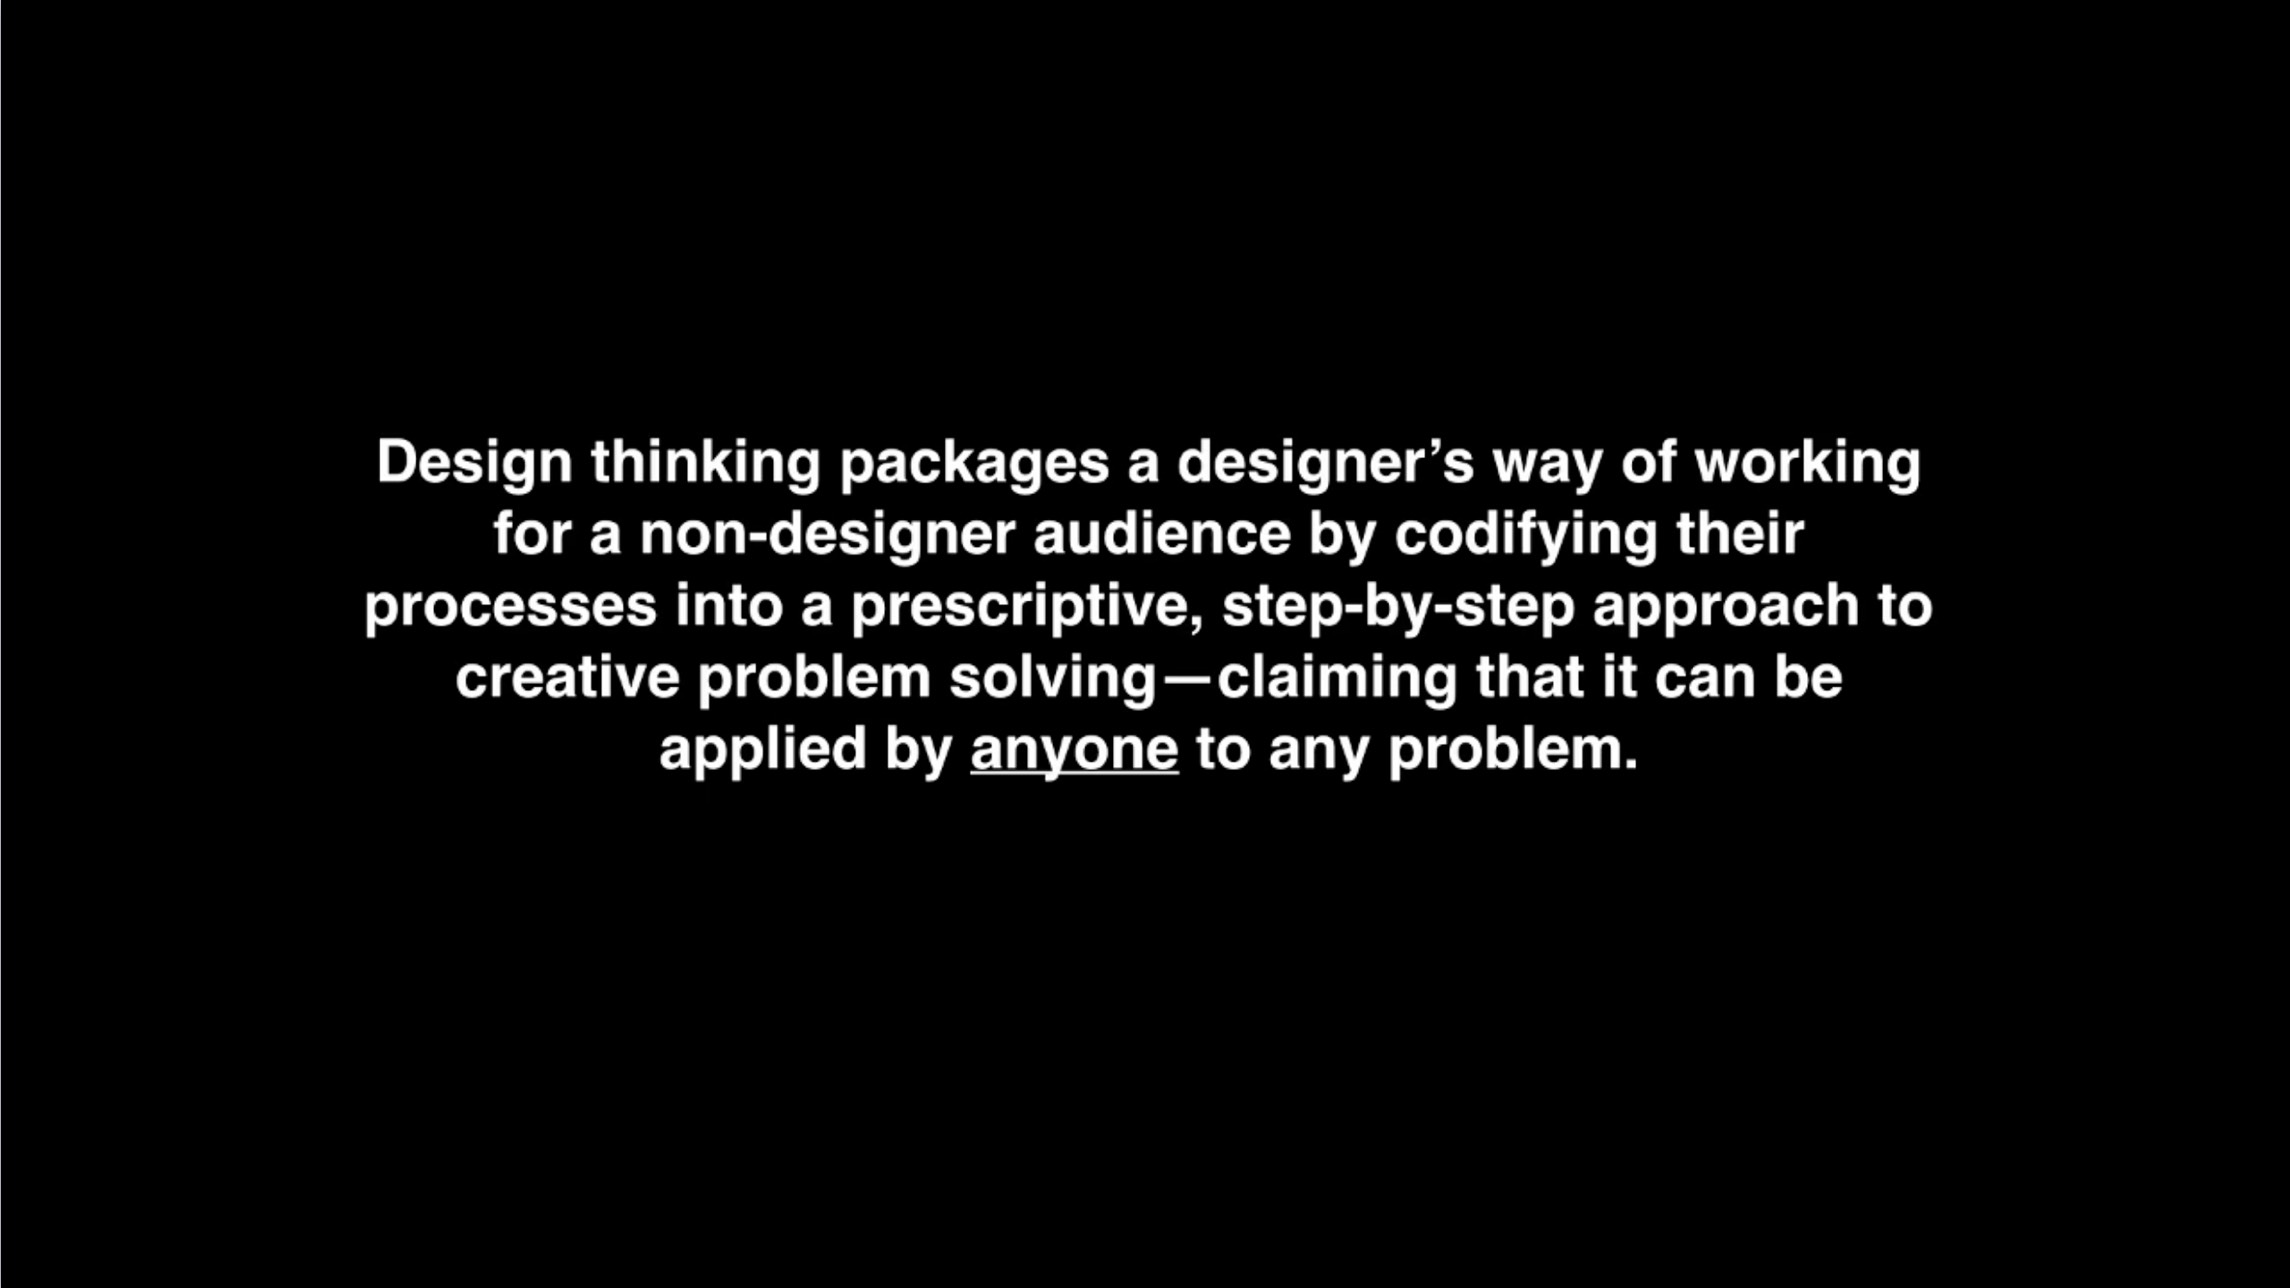 "Design thinking packages a designer’s way of working for a non-designer audience by codifying their proces into a prescriptive, step-by-step approach to creative problem solving—claiming that it can be applied by anyone to any problem." –Natasha Jen